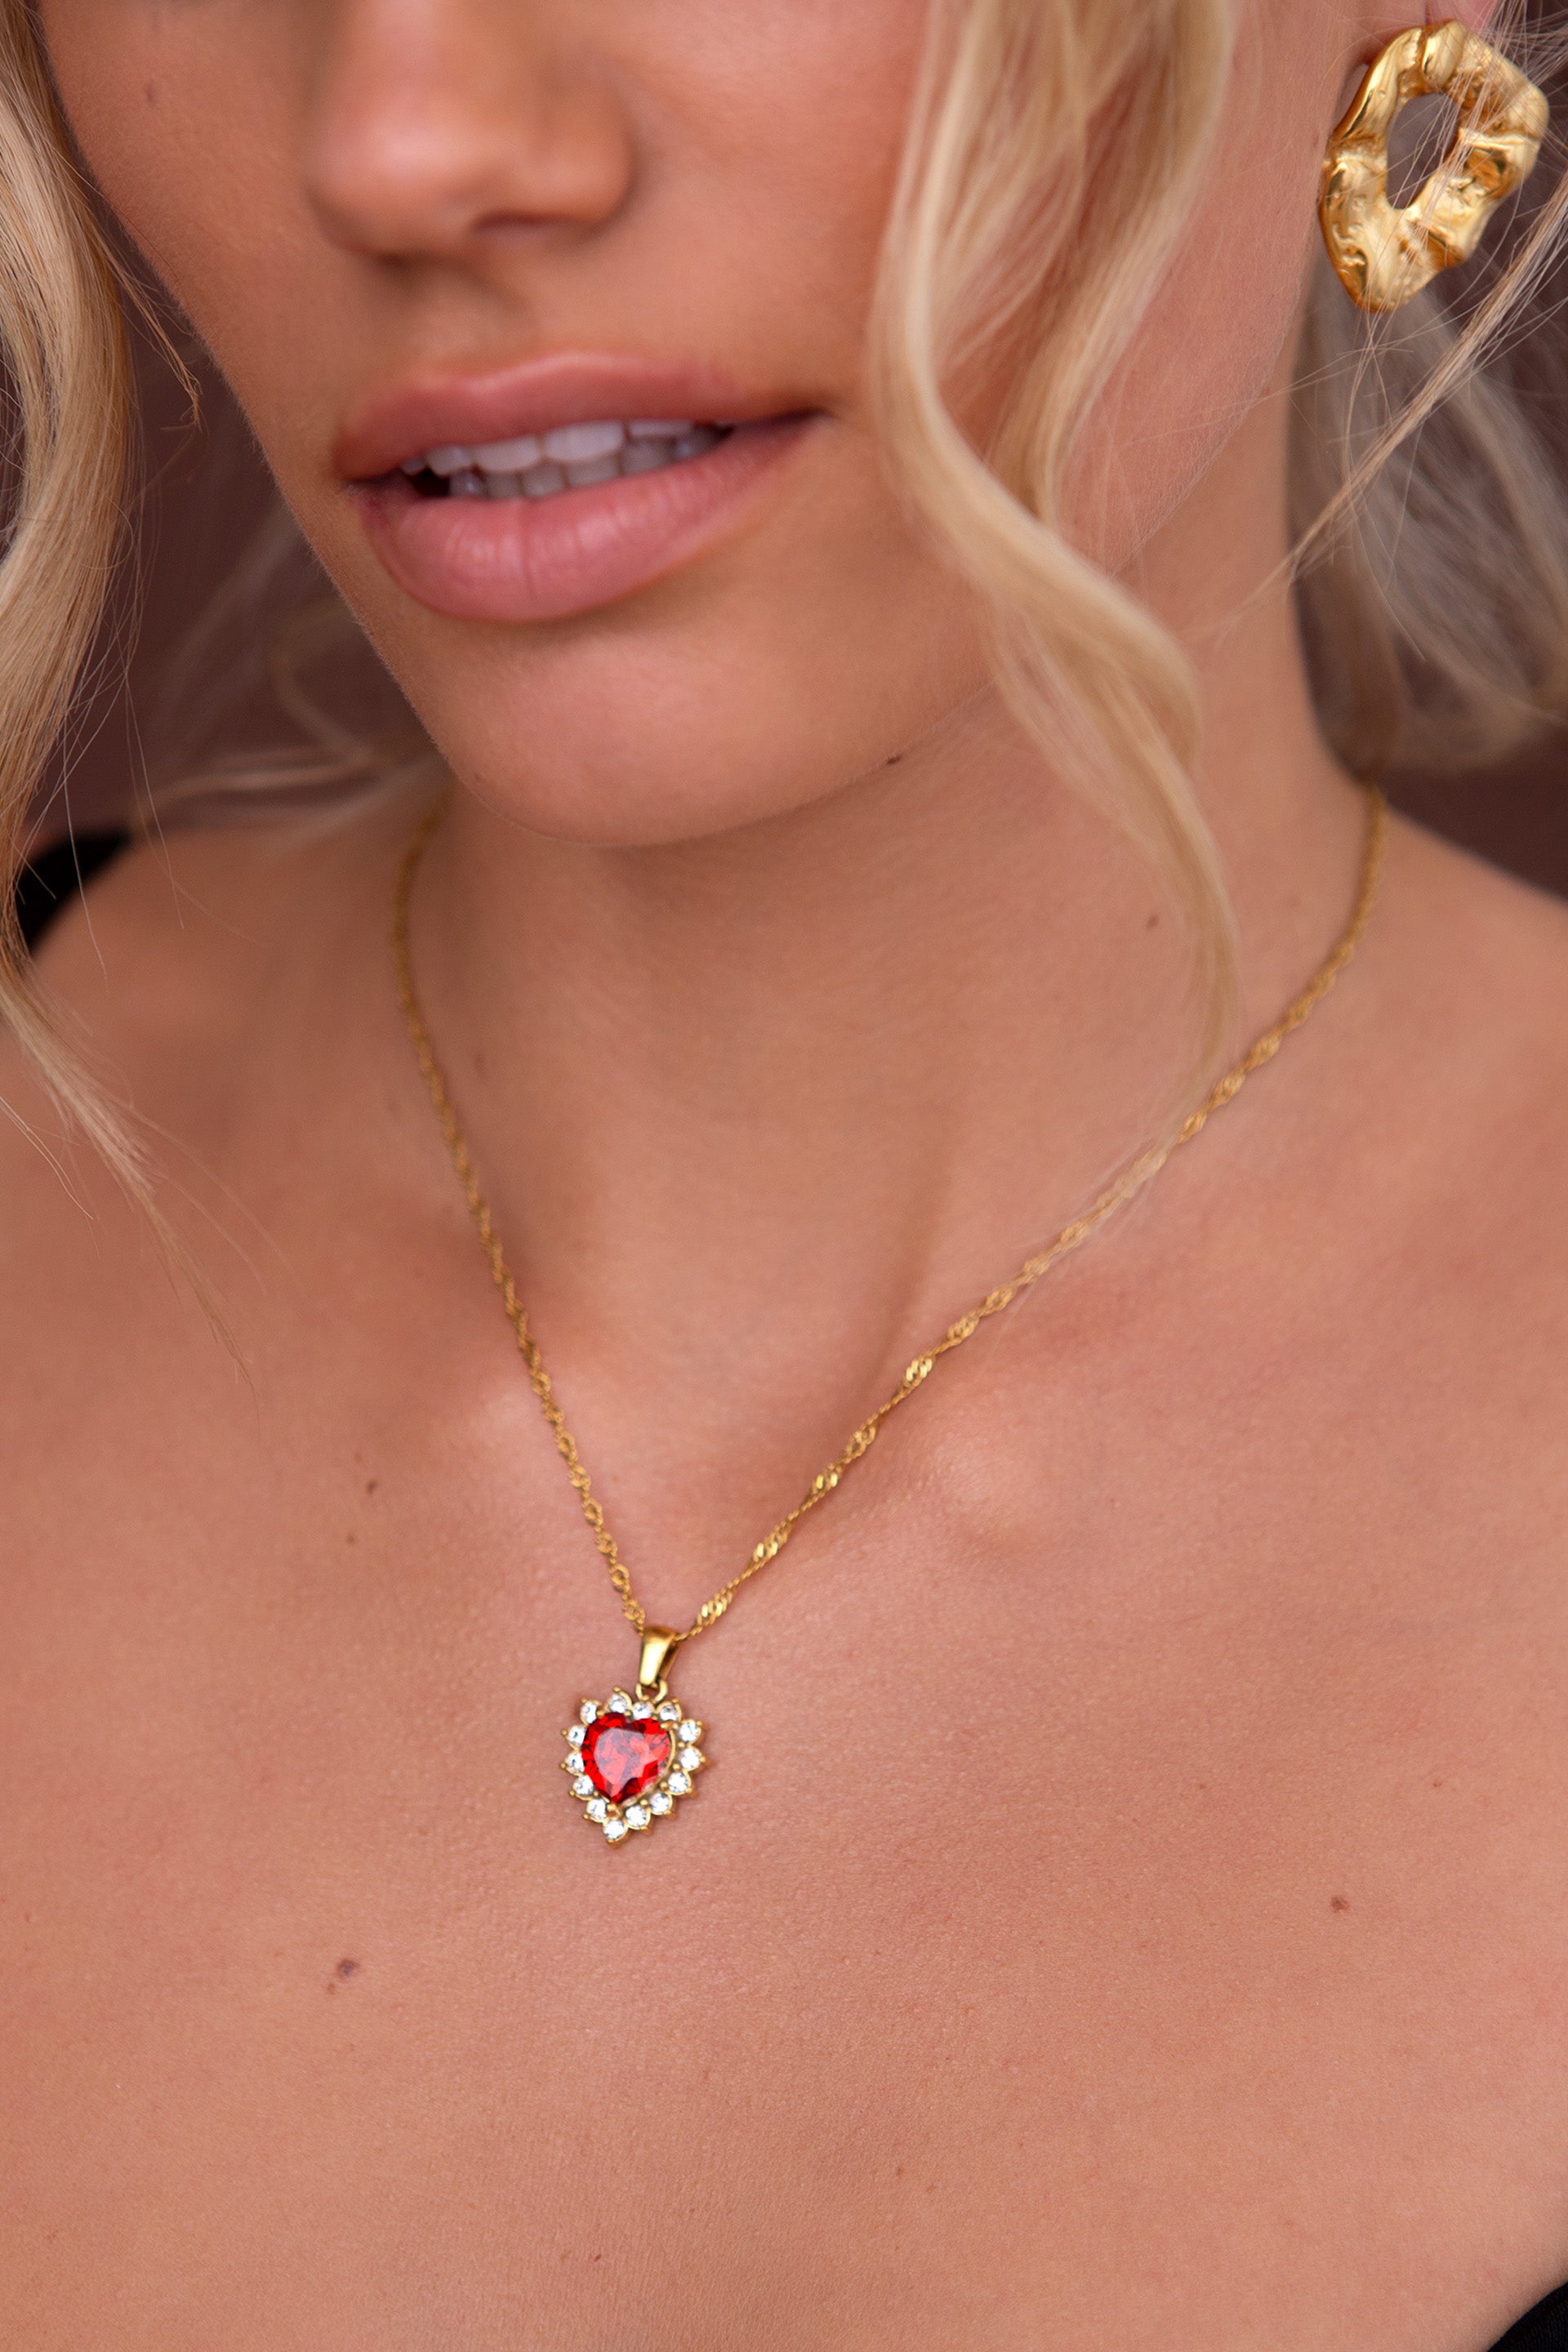 Queen of Hearts Necklace, Fairy Tale Red Crystal Heart Chess Piece Charm  Necklace, Long Necklace | Red crystal jewelry, Heart shaped necklace, Heart  necklace